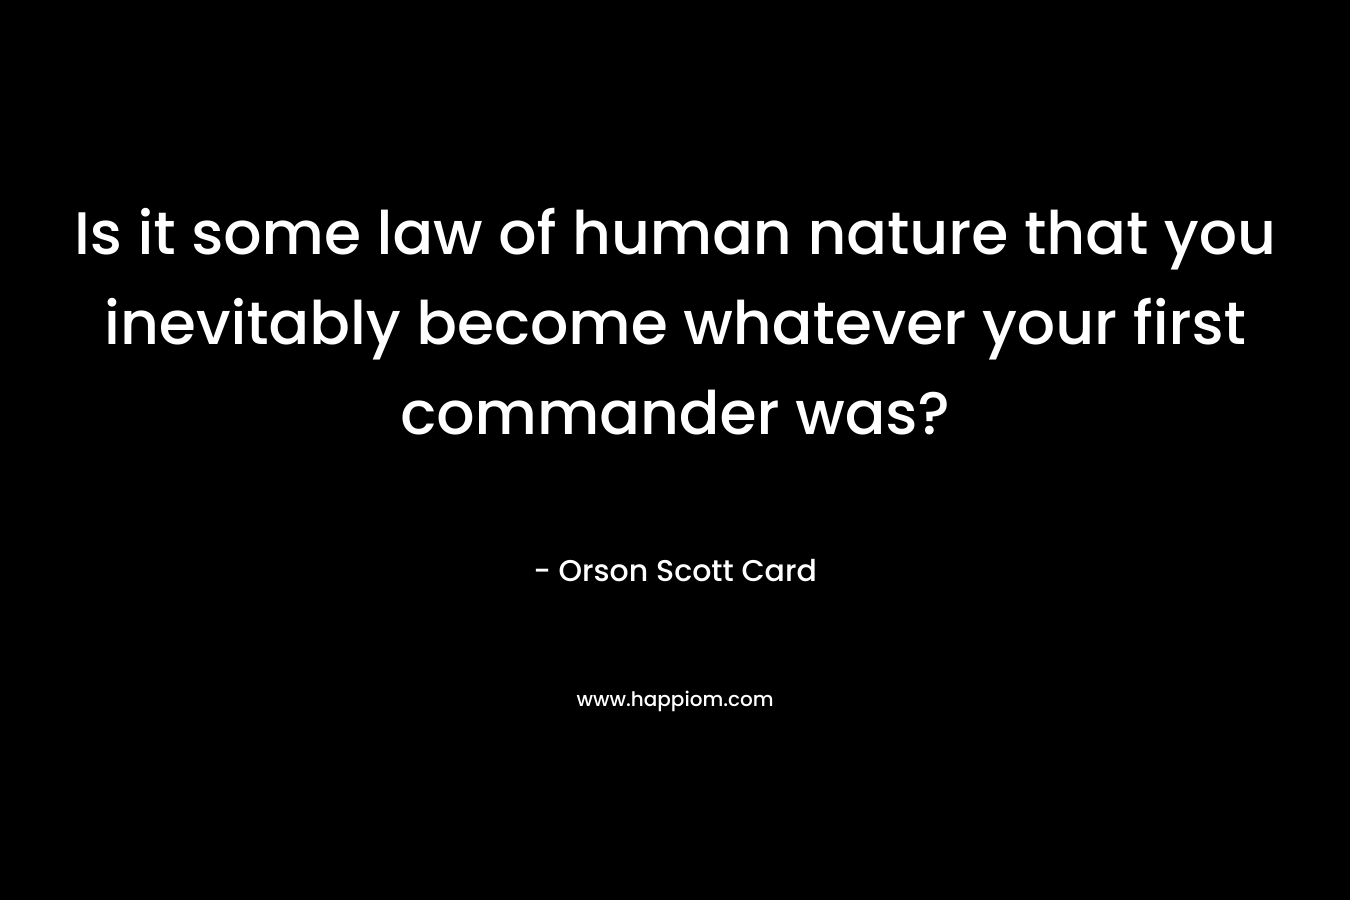 Is it some law of human nature that you inevitably become whatever your first commander was?